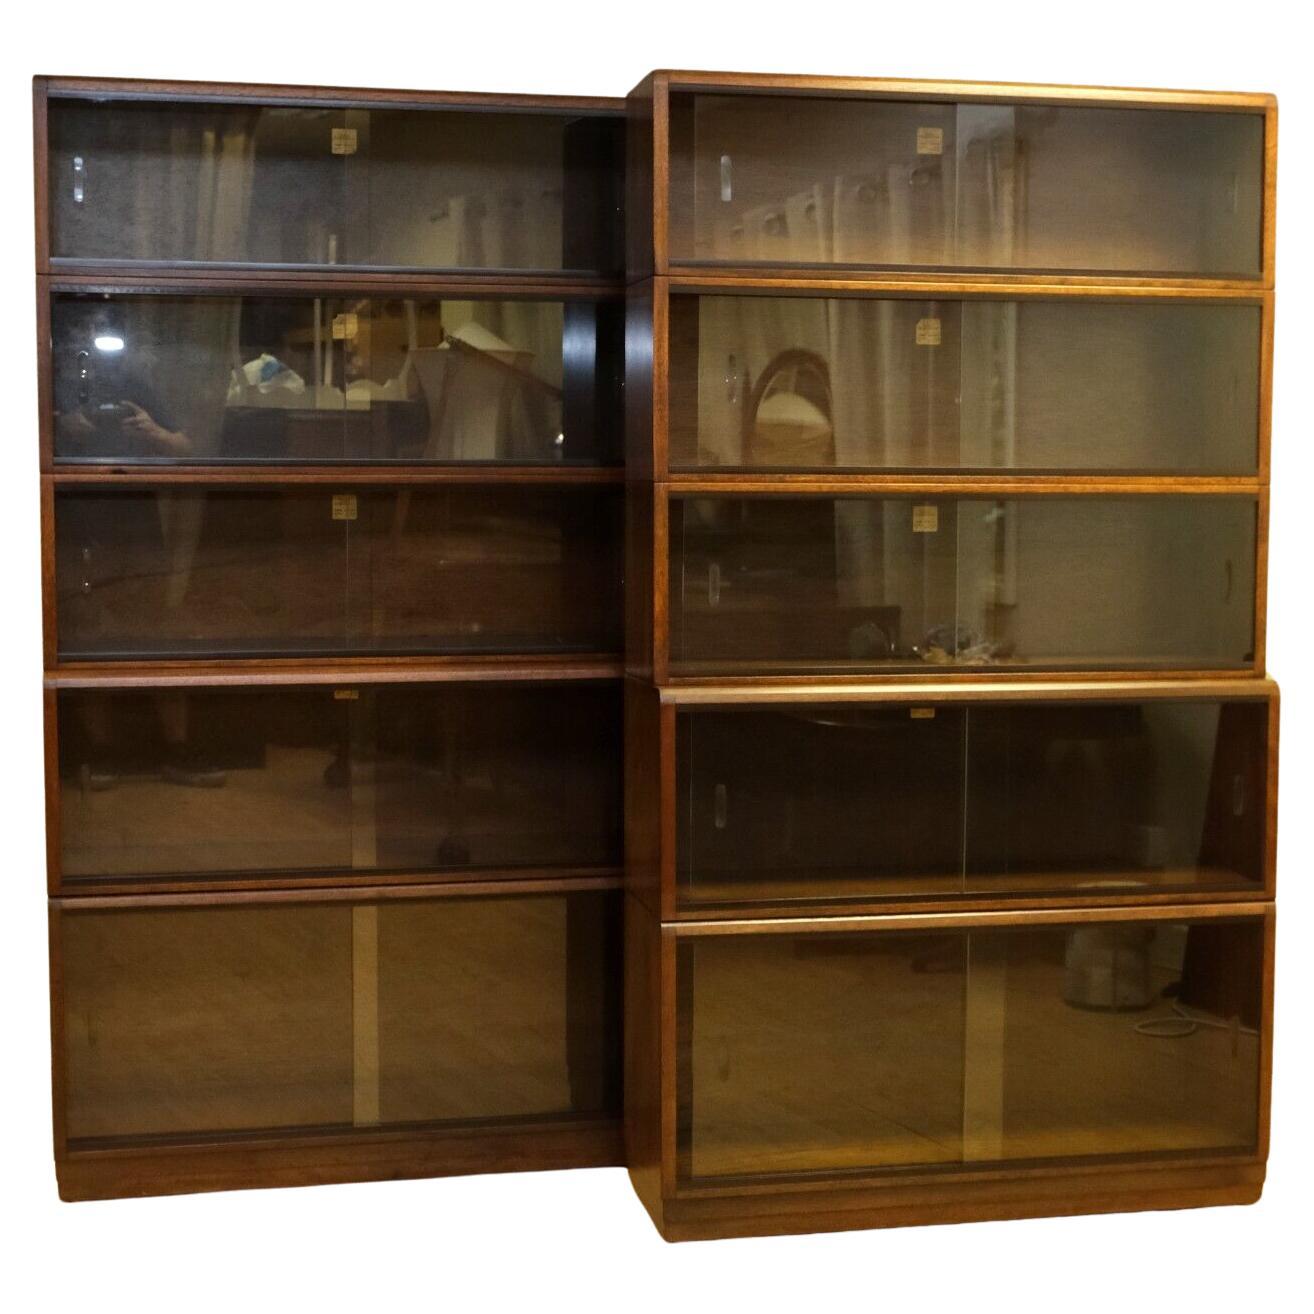 PAIR OF 1960'S SIMPLEX HARDWOOD FULL SIZED LIBRARY STACKING BOOKCASES FiVE PIECE